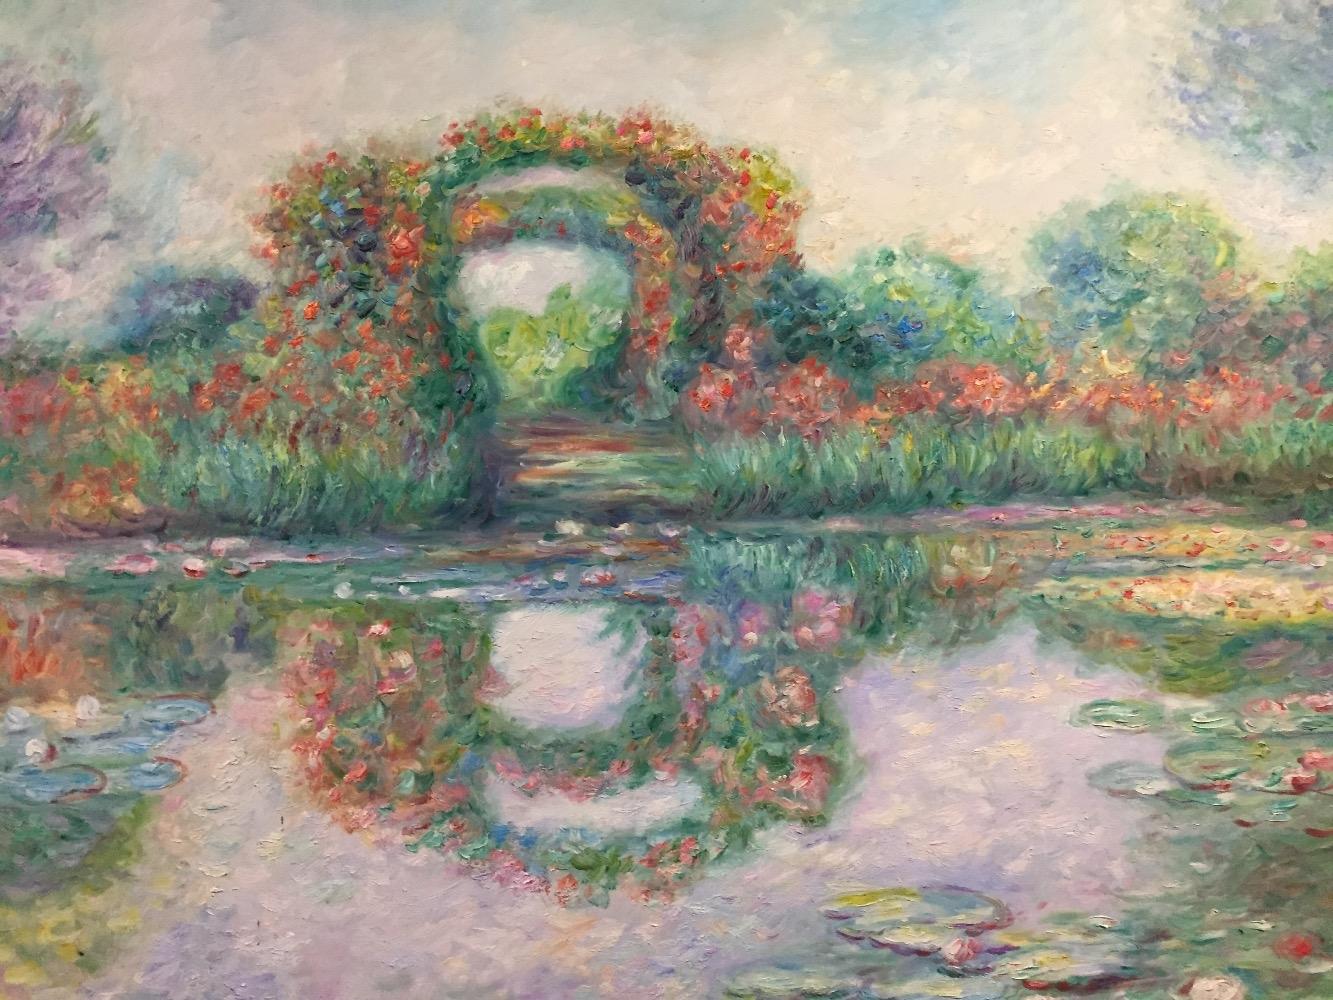 Monets garden in Giverny